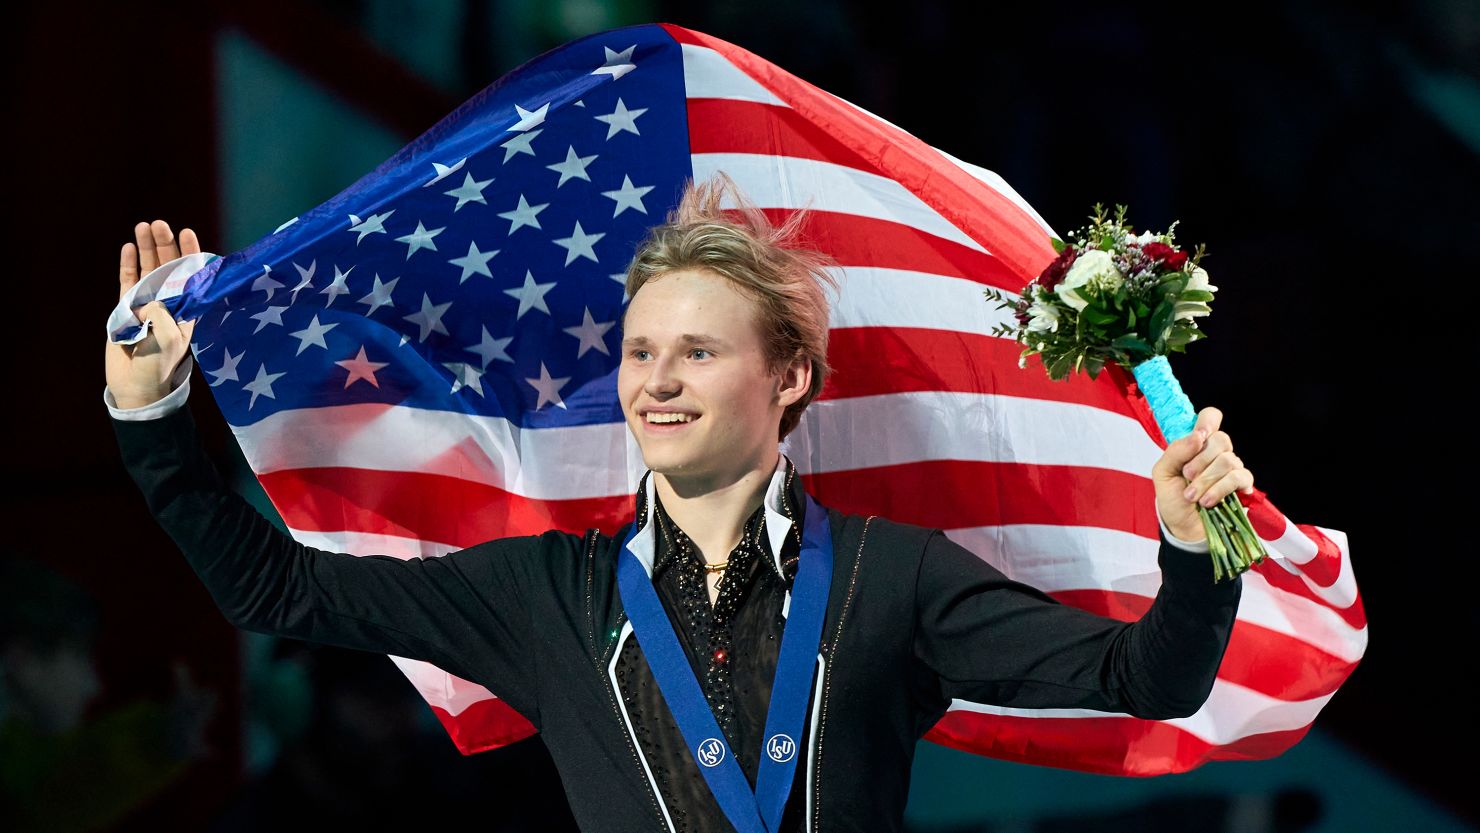 Ilia Malinin won the gold medal after an extraordinary free skate.